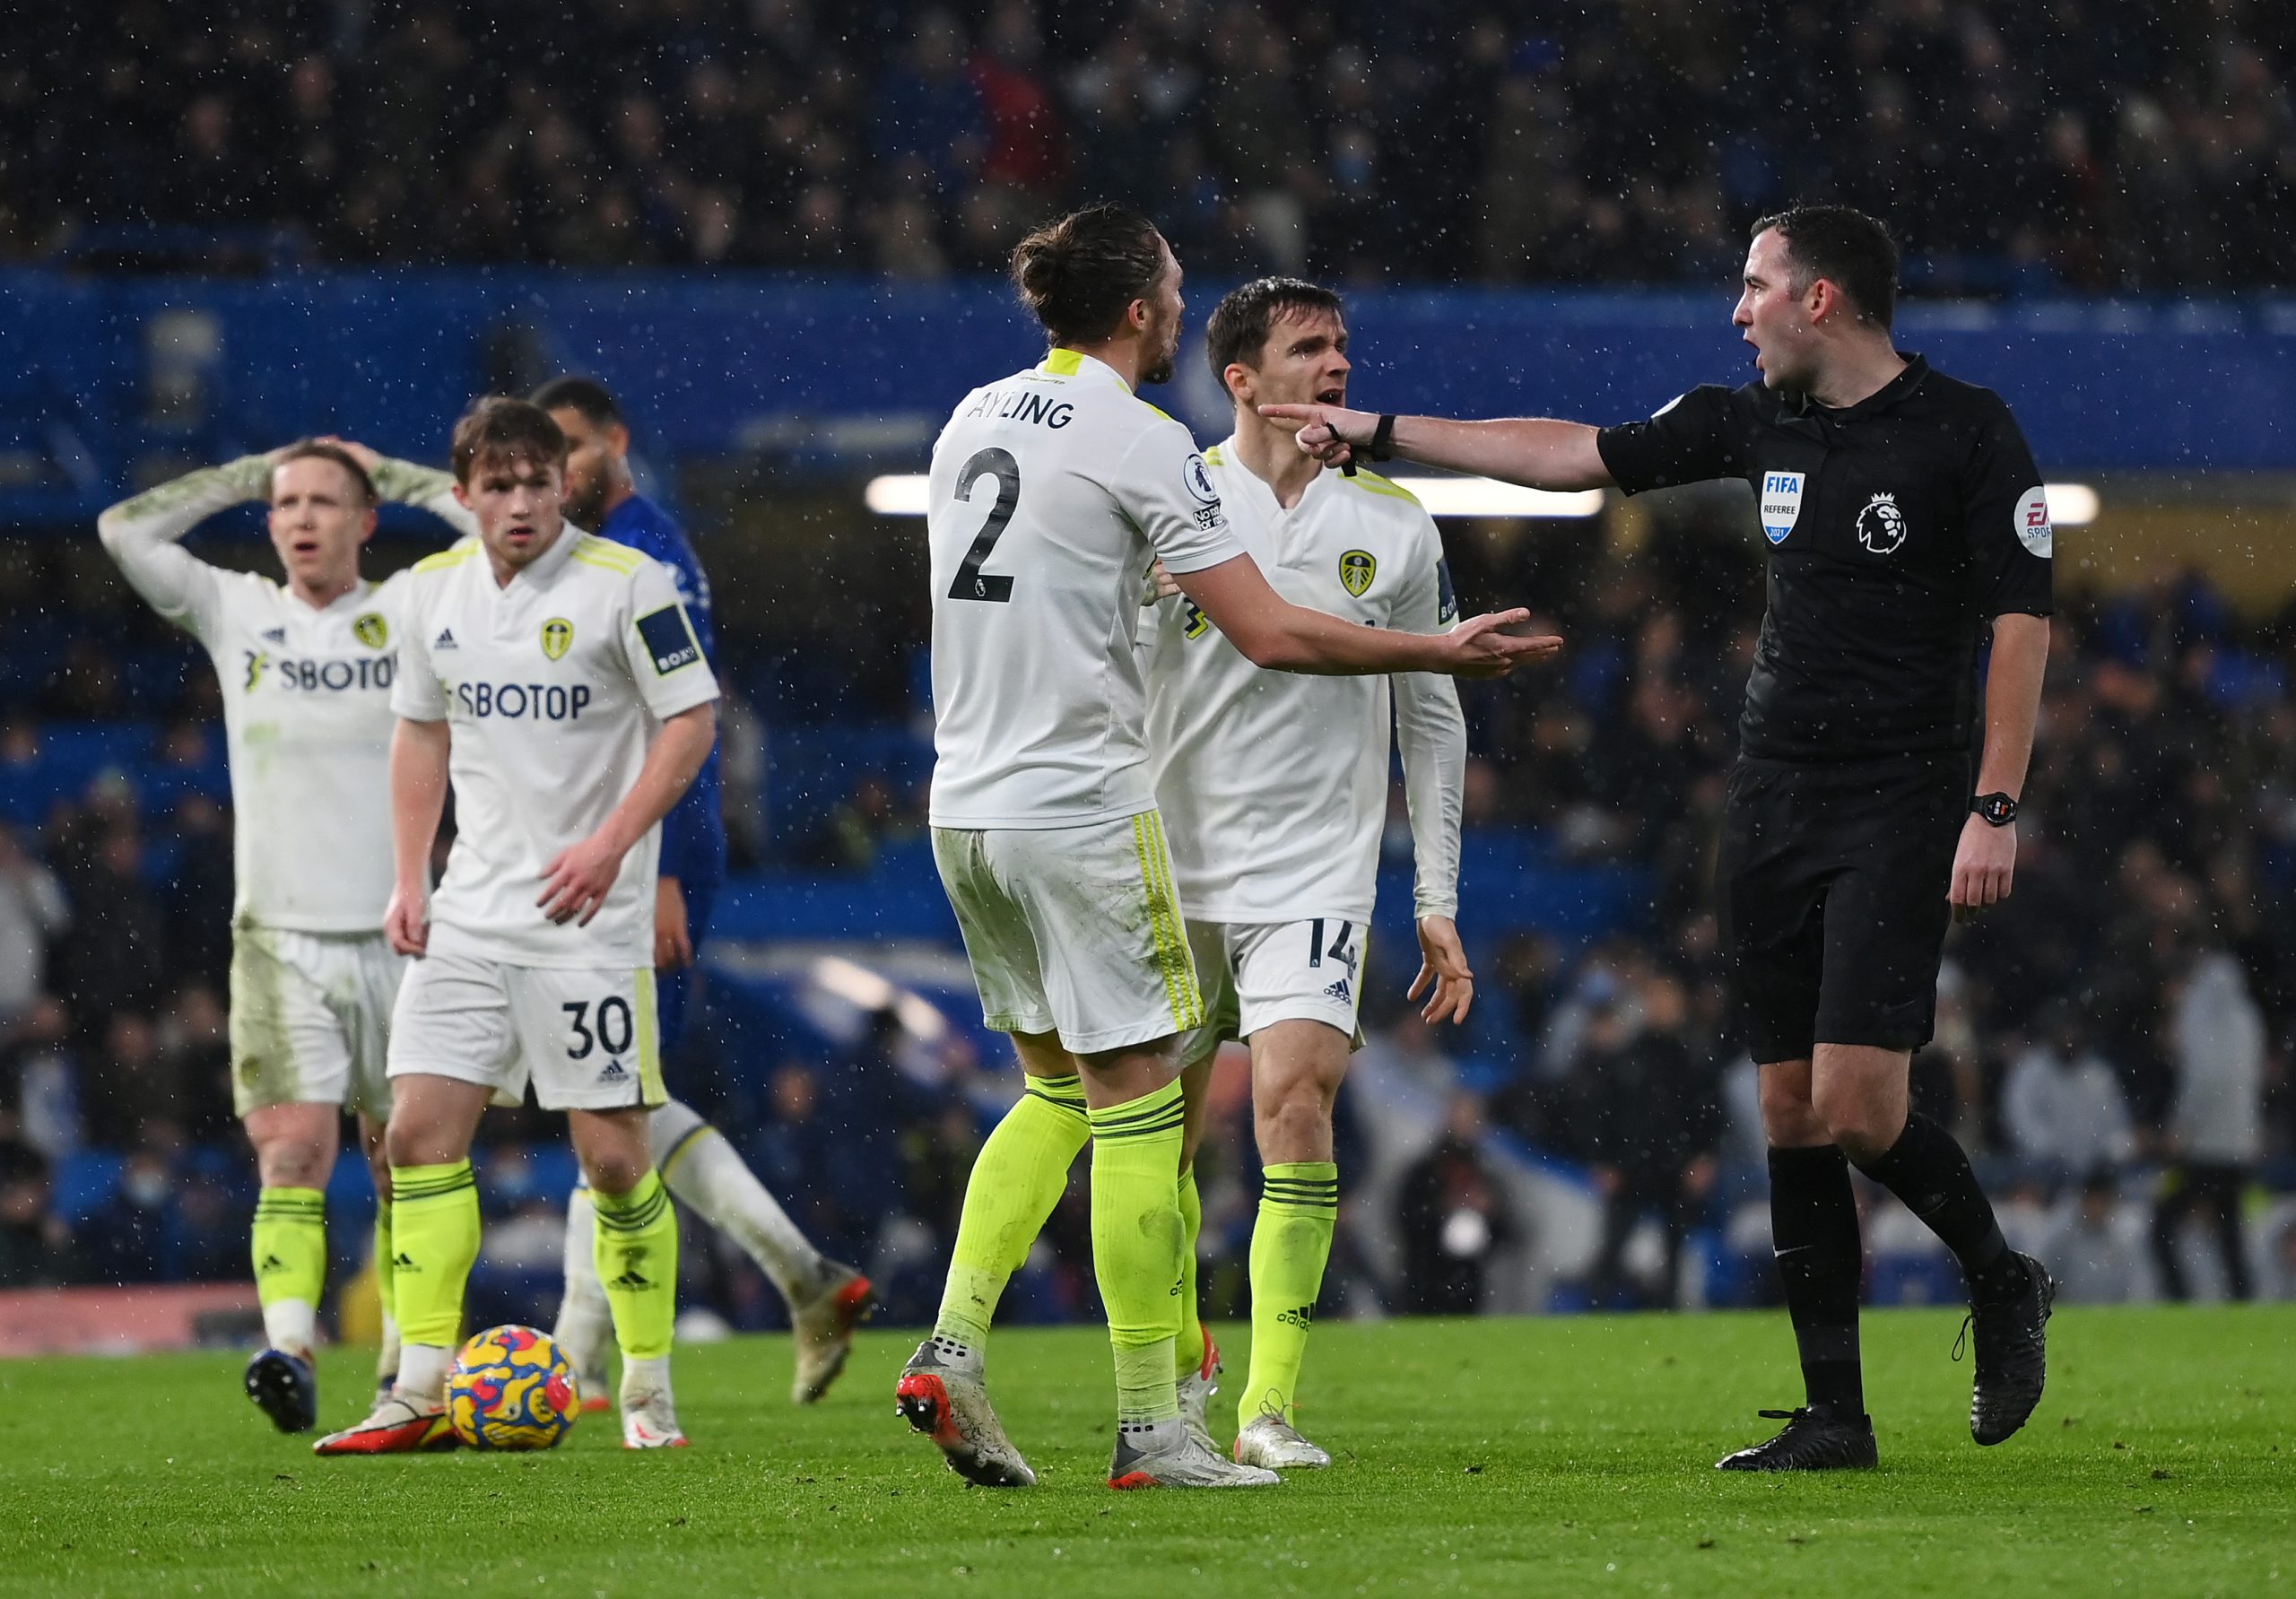 LONDON, ENGLAND - DECEMBER 11: Luke Ayling and Diego Llorente of Leeds United react towards Match Referee, Chris Kavanagh as he awards a penalty to Chelsea during the Premier League match between Chelsea and Leeds United at Stamford Bridge on December 11, 2021 in London, England. (Photo by Mike Hewitt/Getty Images)
The 4th Official uses images provided by the following image agency:
Getty Images (https://www.gettyimages.de/)
Imago Images (https://www.imago-images.de/)